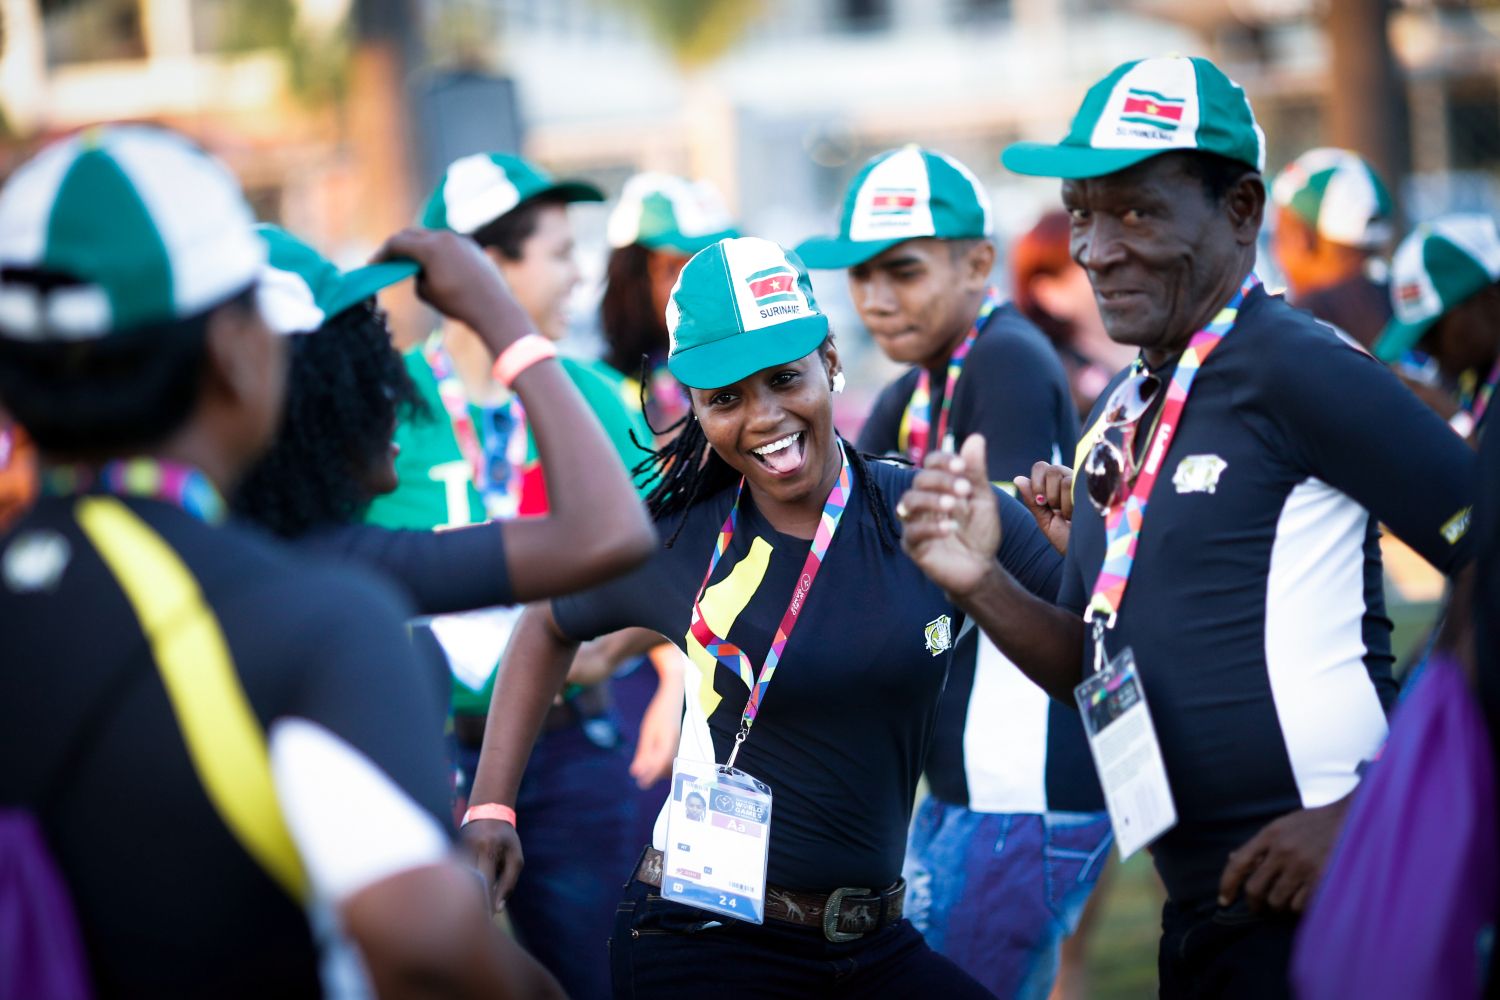 Delegation aus Suriname bei den Special Olympics World Games 2015 in den USA | Delegation from Suriname at the Special Olympics World Games 2015 in the USA